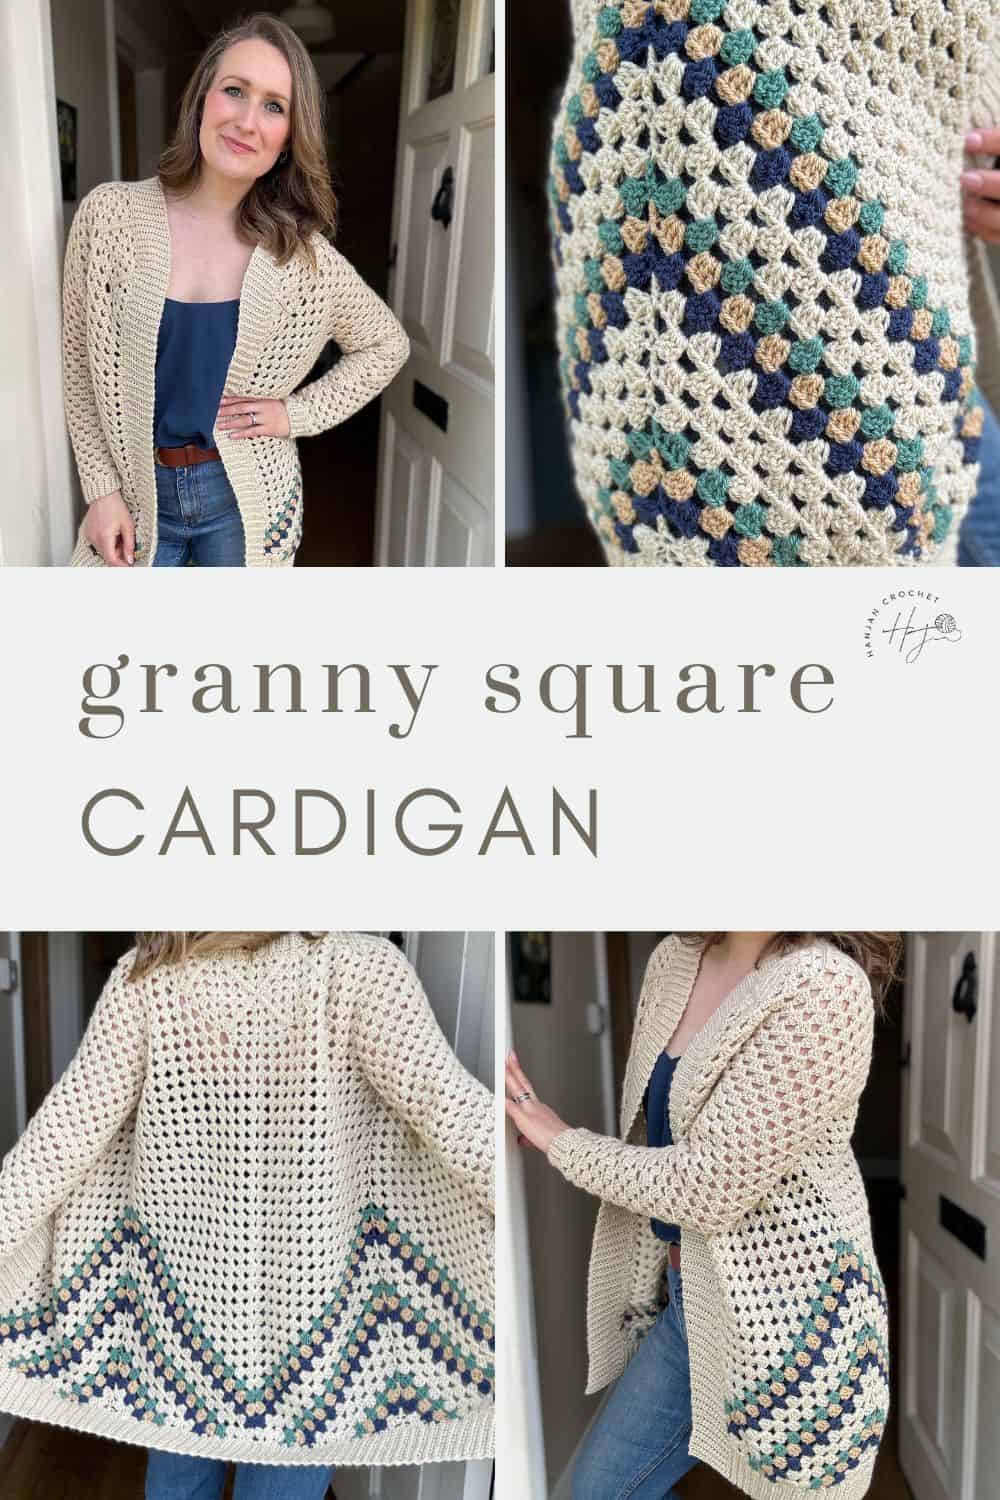 A woman modeling a handcrafted granny square cardigan from different angles.